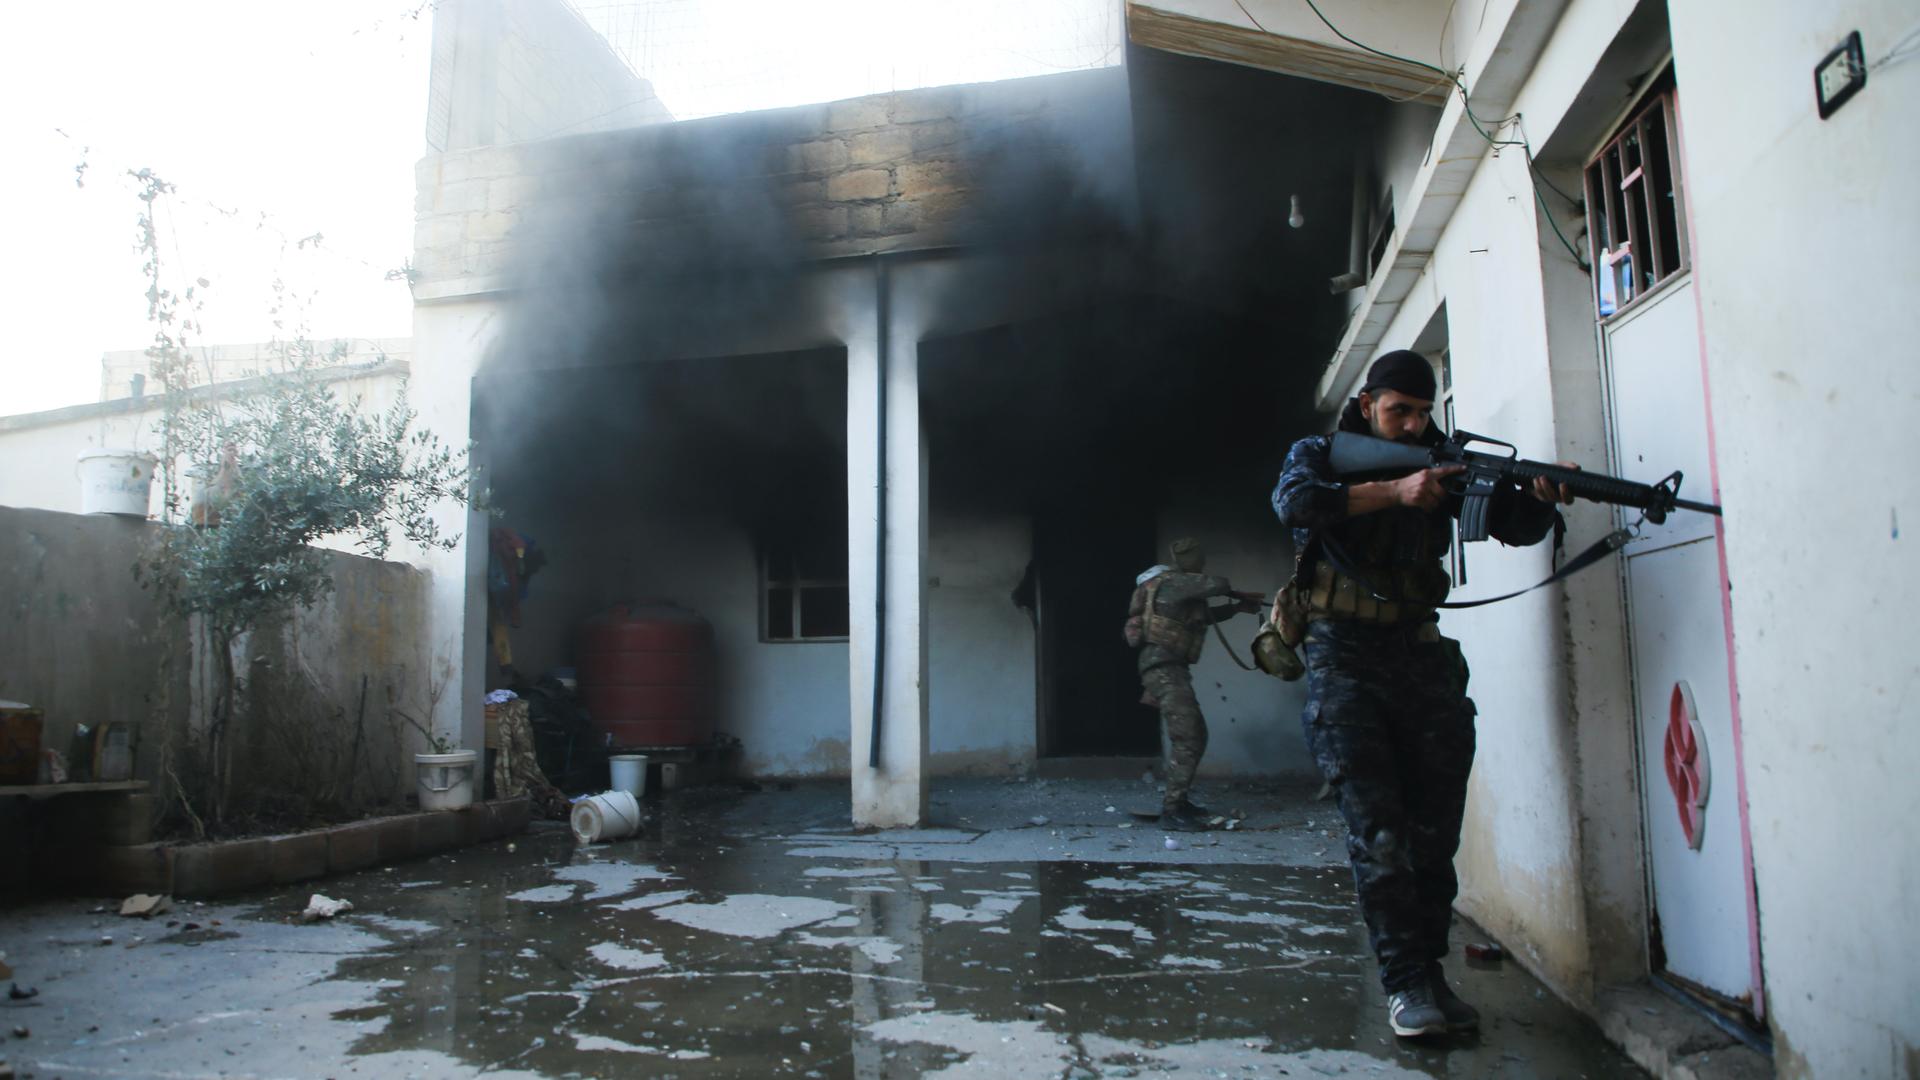 Soldiers with the US-backed Syrian Democratic Forces check a house in Hassakeh, Syria, Jan. 25, 2022. After breaking into the prison late Thursday, ISIS militants were joined by others rioting inside the facility that housed over 3,000 inmates, including 